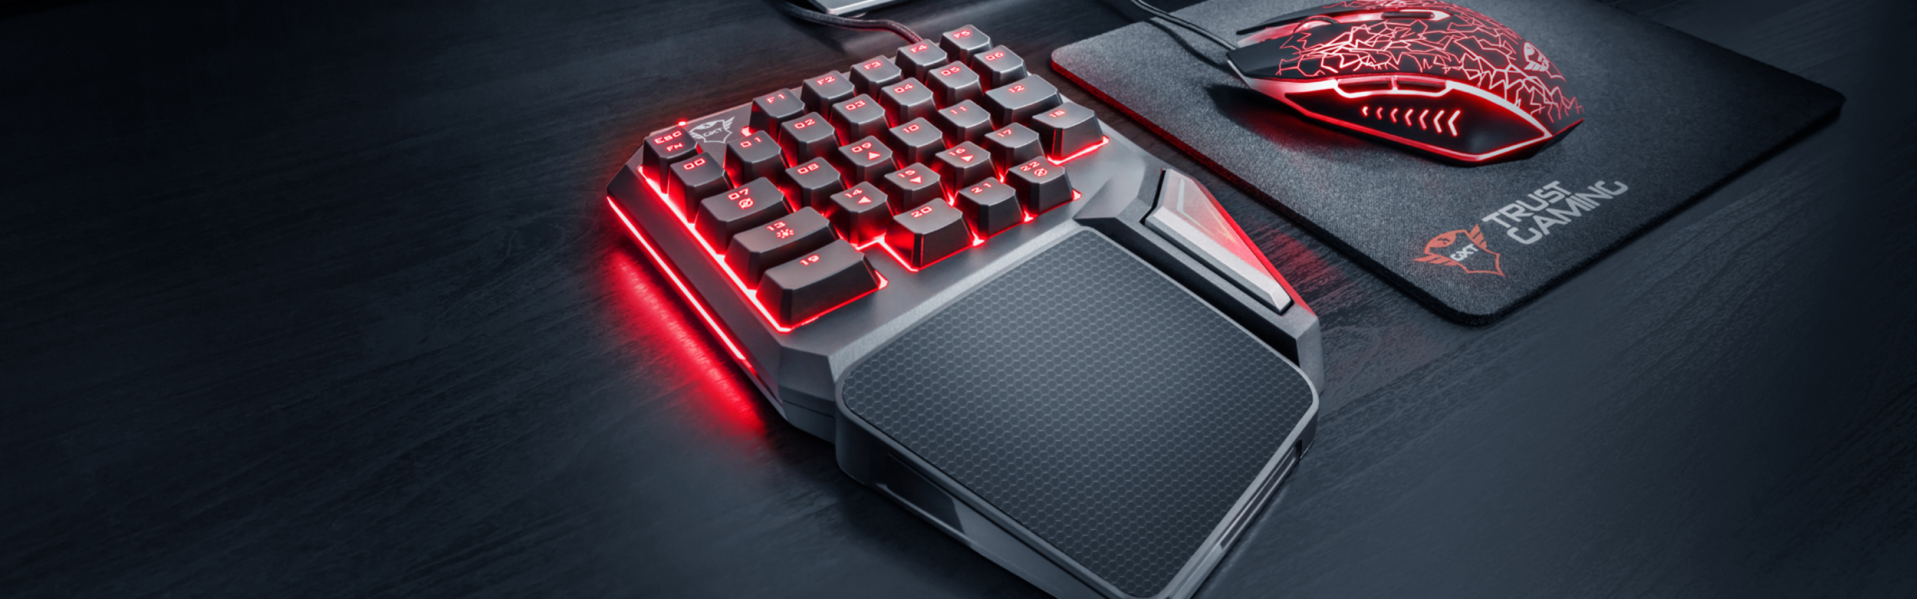 macros programmables LED Lumineux Anti Ghosting Trust Gaming GXT 888 Assa Clavier Gaming Une Main 